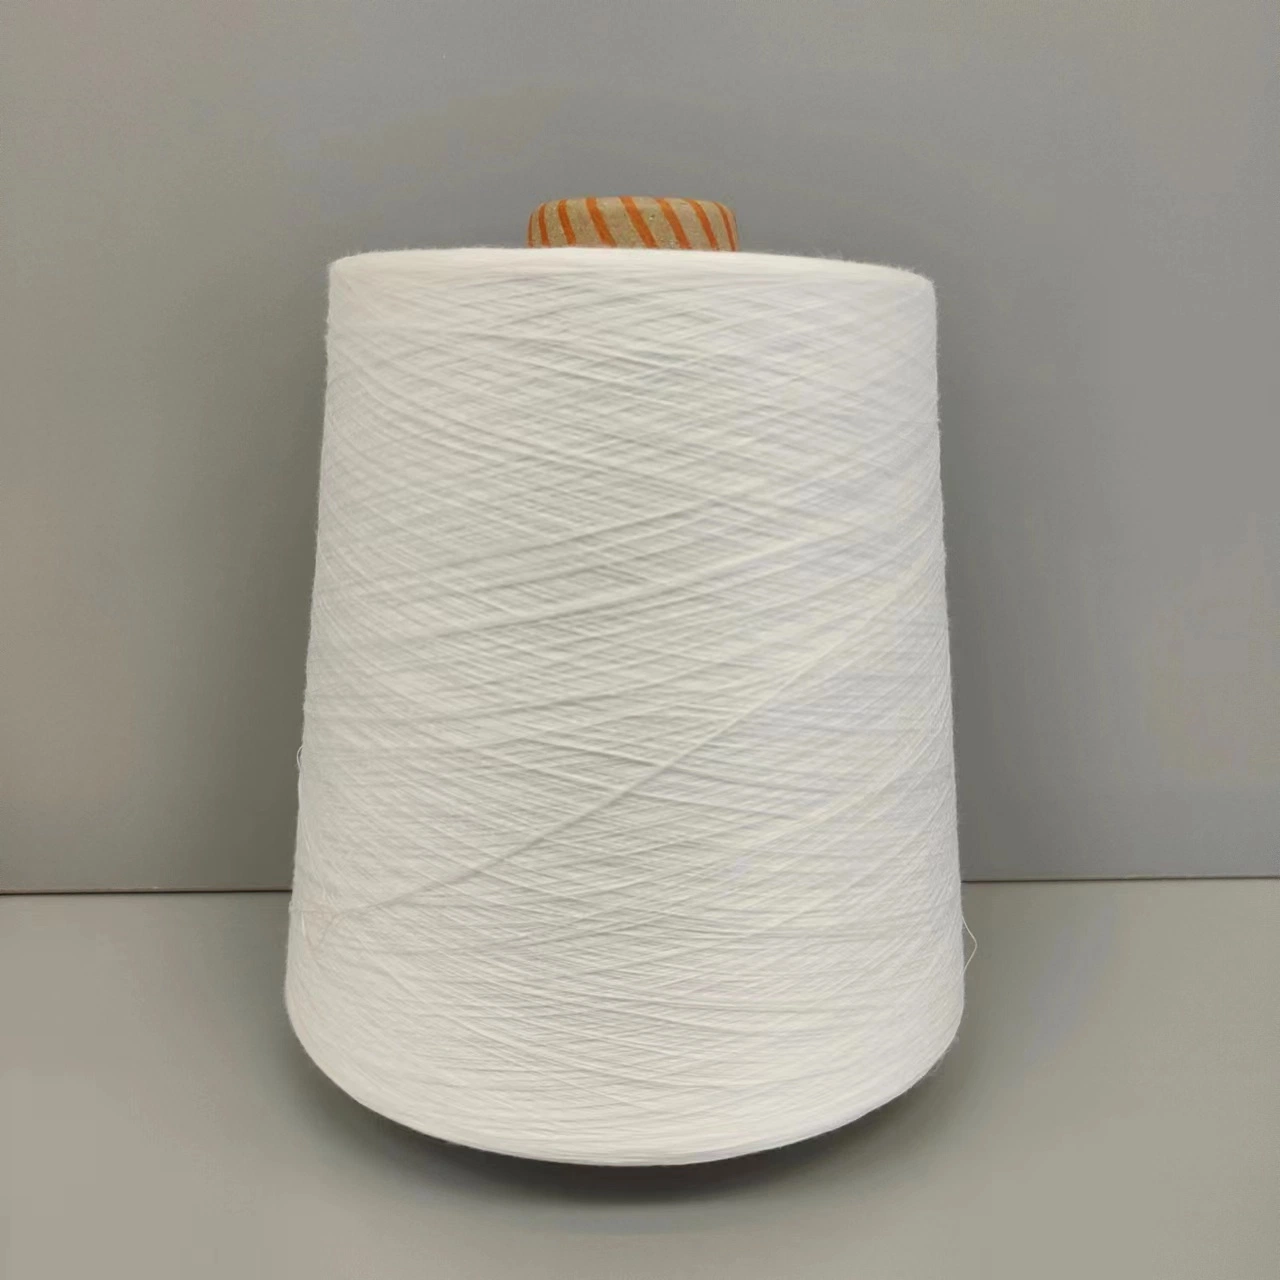 Raw White Factory Wholesale/Supplier Viscose/Cotton Blended by 50/50 Combed Siro Compact Spun Yarn 50s/1